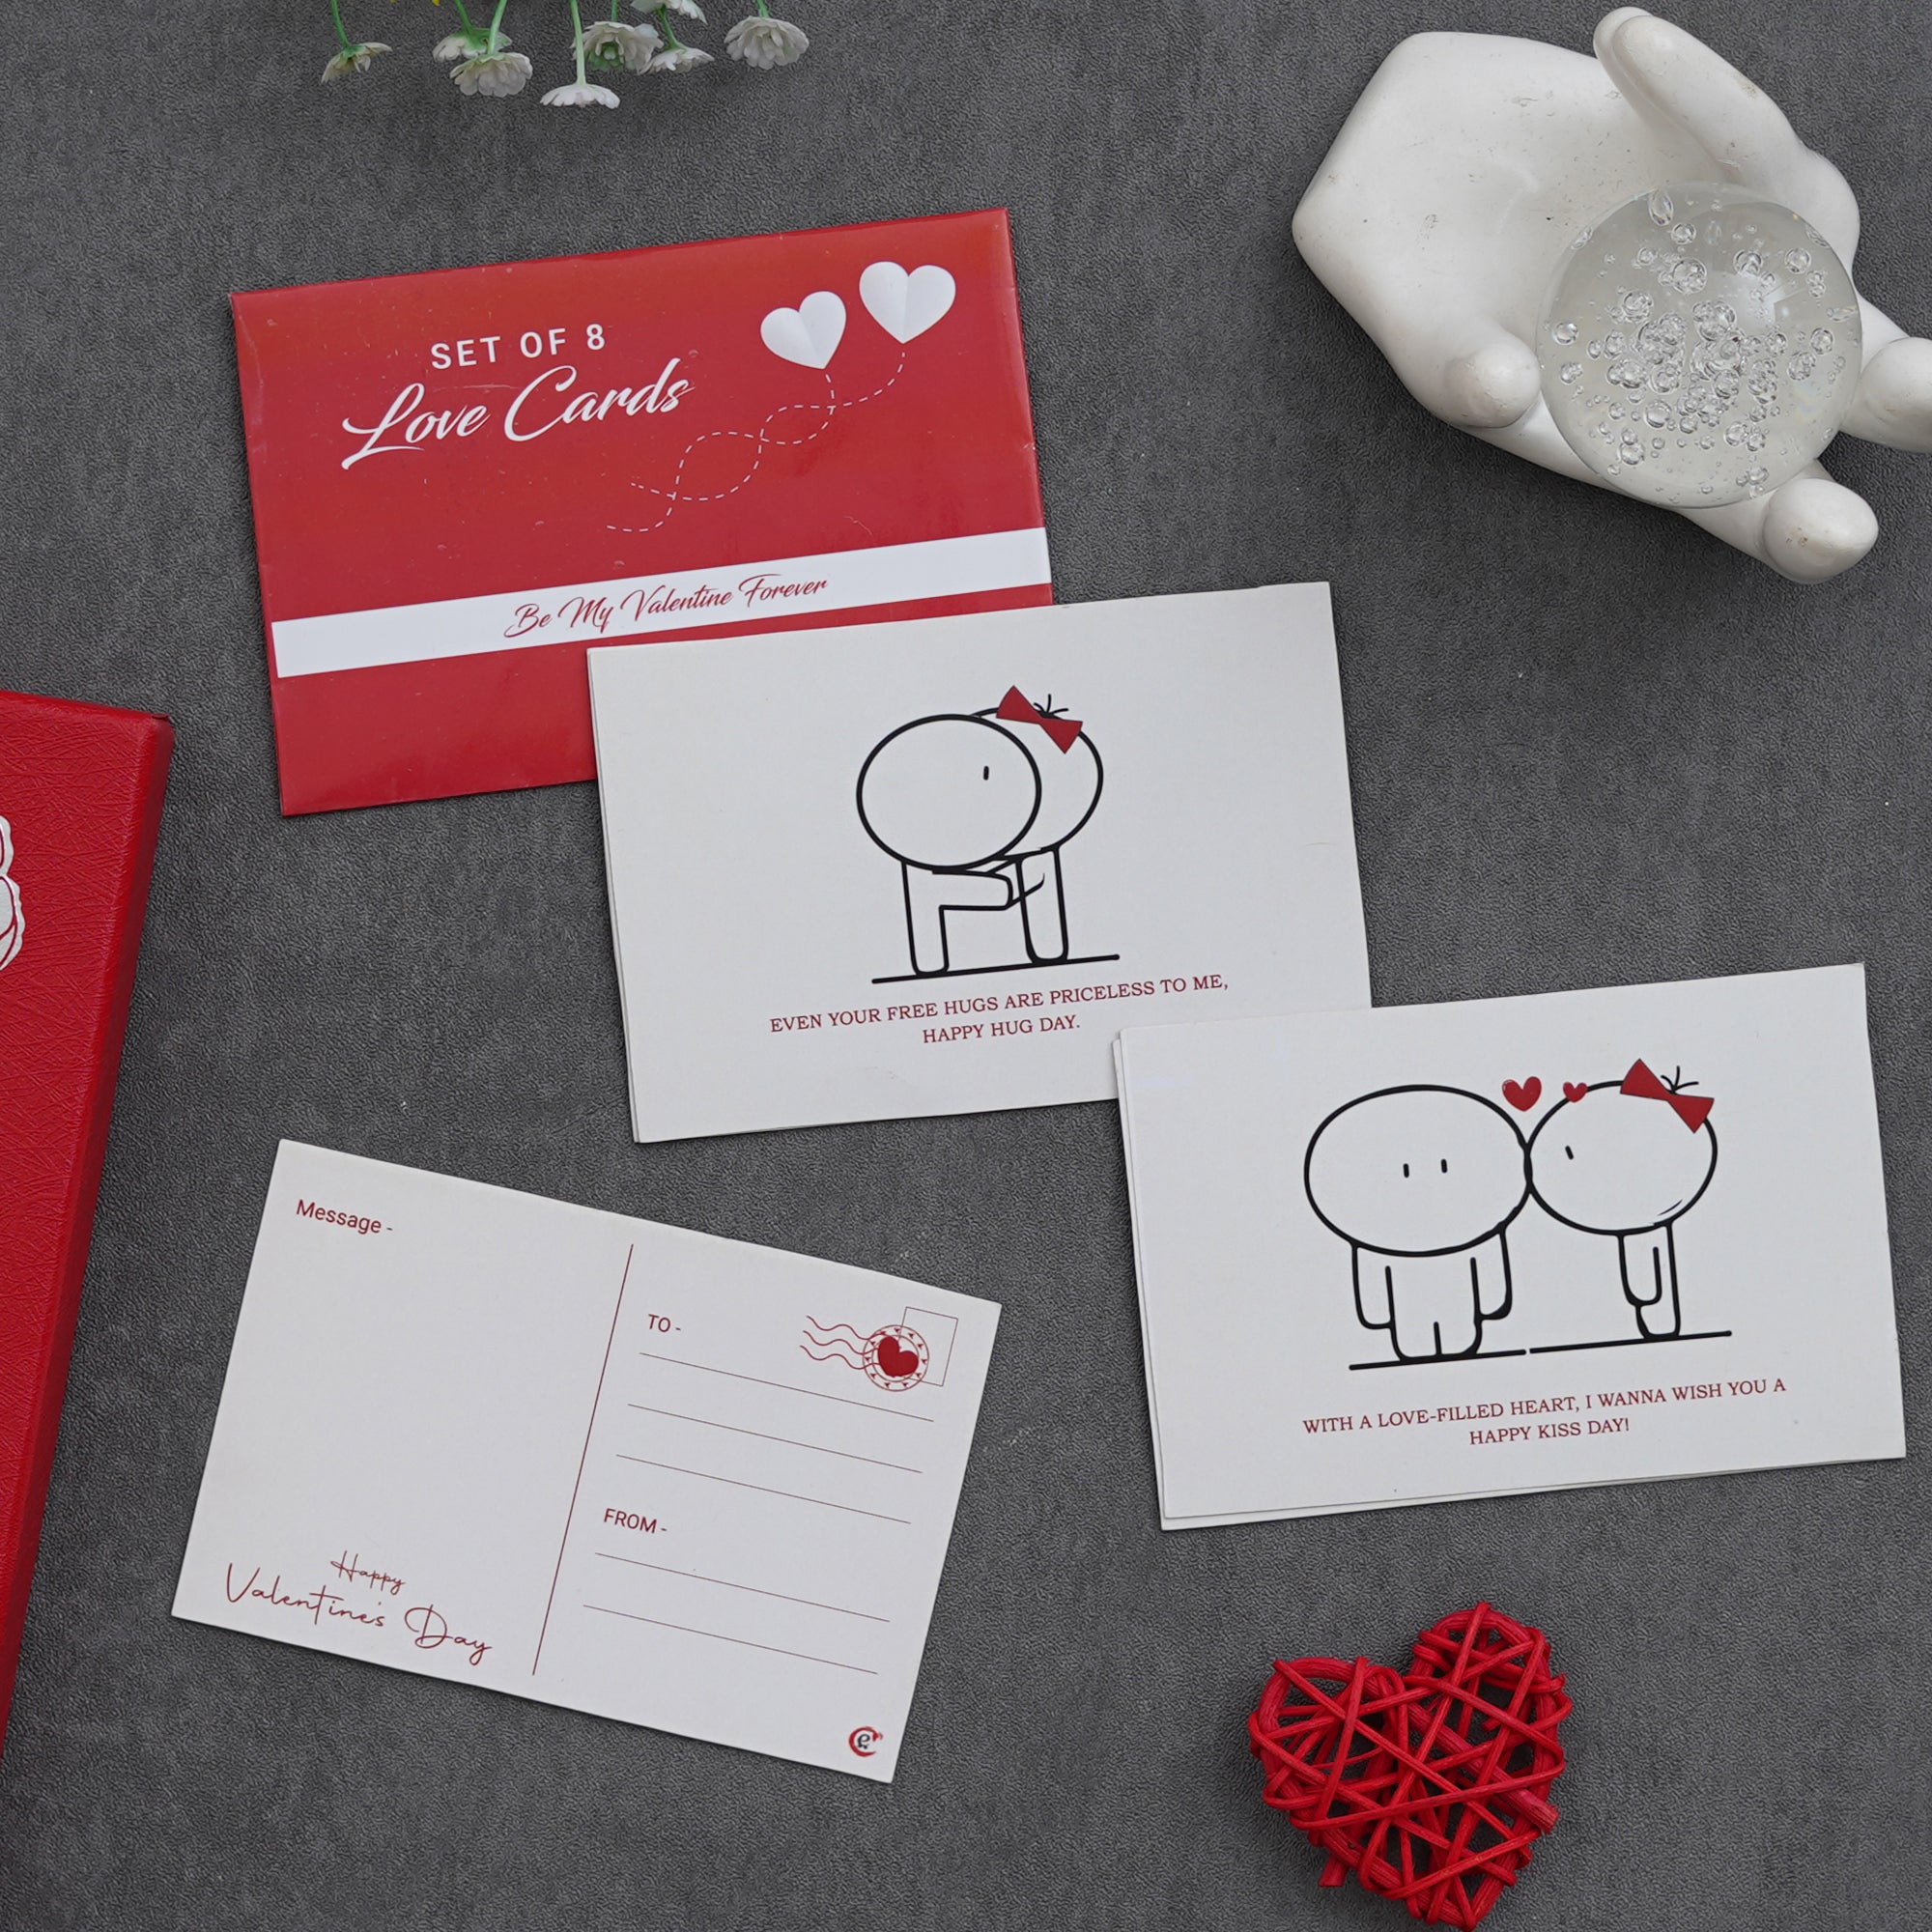 Valentine Combo of Set of 8 Love Post Cards Gift Cards Set, Red Gift Box with Teddy & Roses, "20 Reasons Why I Love You" Printed on Little Hearts Wooden Gift Set 1